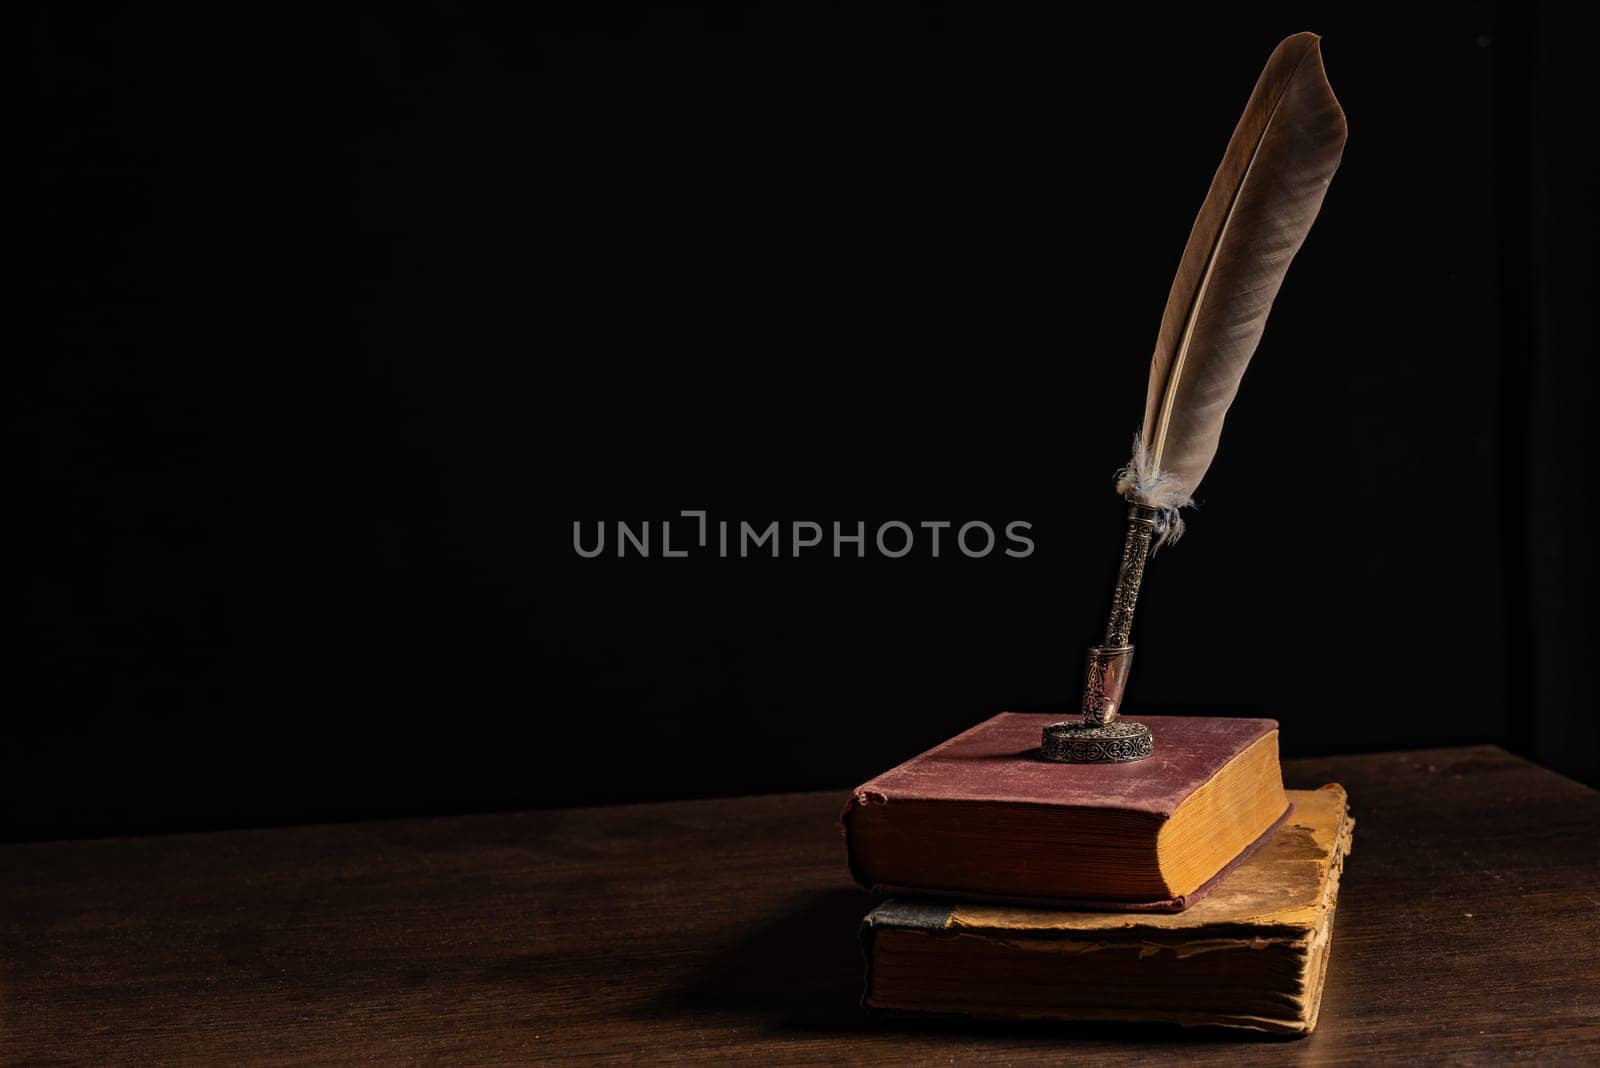 Quill pen and inkwell resting on an old book concept for literature, writing, author and history by zartarn